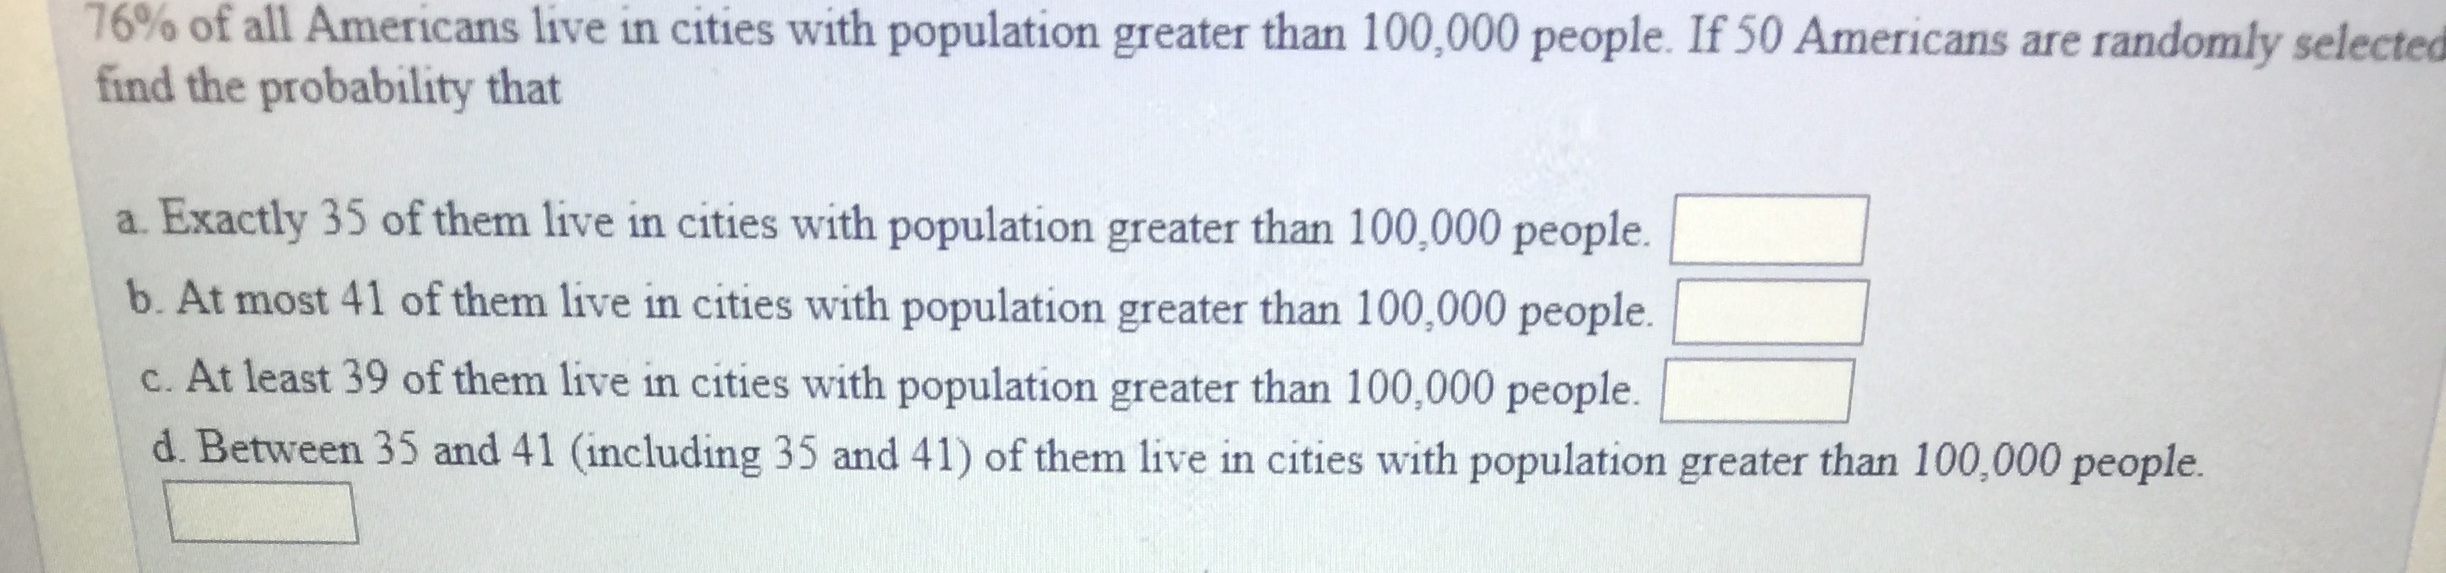 76% of all Americans live in cities with population greater than 100,000 people. If 50 Americans are randomly selected
find the probability that
a. Exactly 35 of them live in cities with population greater than 100,000 people.
b. At most 41 of them live in cities with population greater than 100,000 people.
c. At least 39 of them live in cities with population greater than 100,000 people. D
d. Between 35 and 41 (including 35 and 41) of them live in cities with population greater than 100,000 people.
